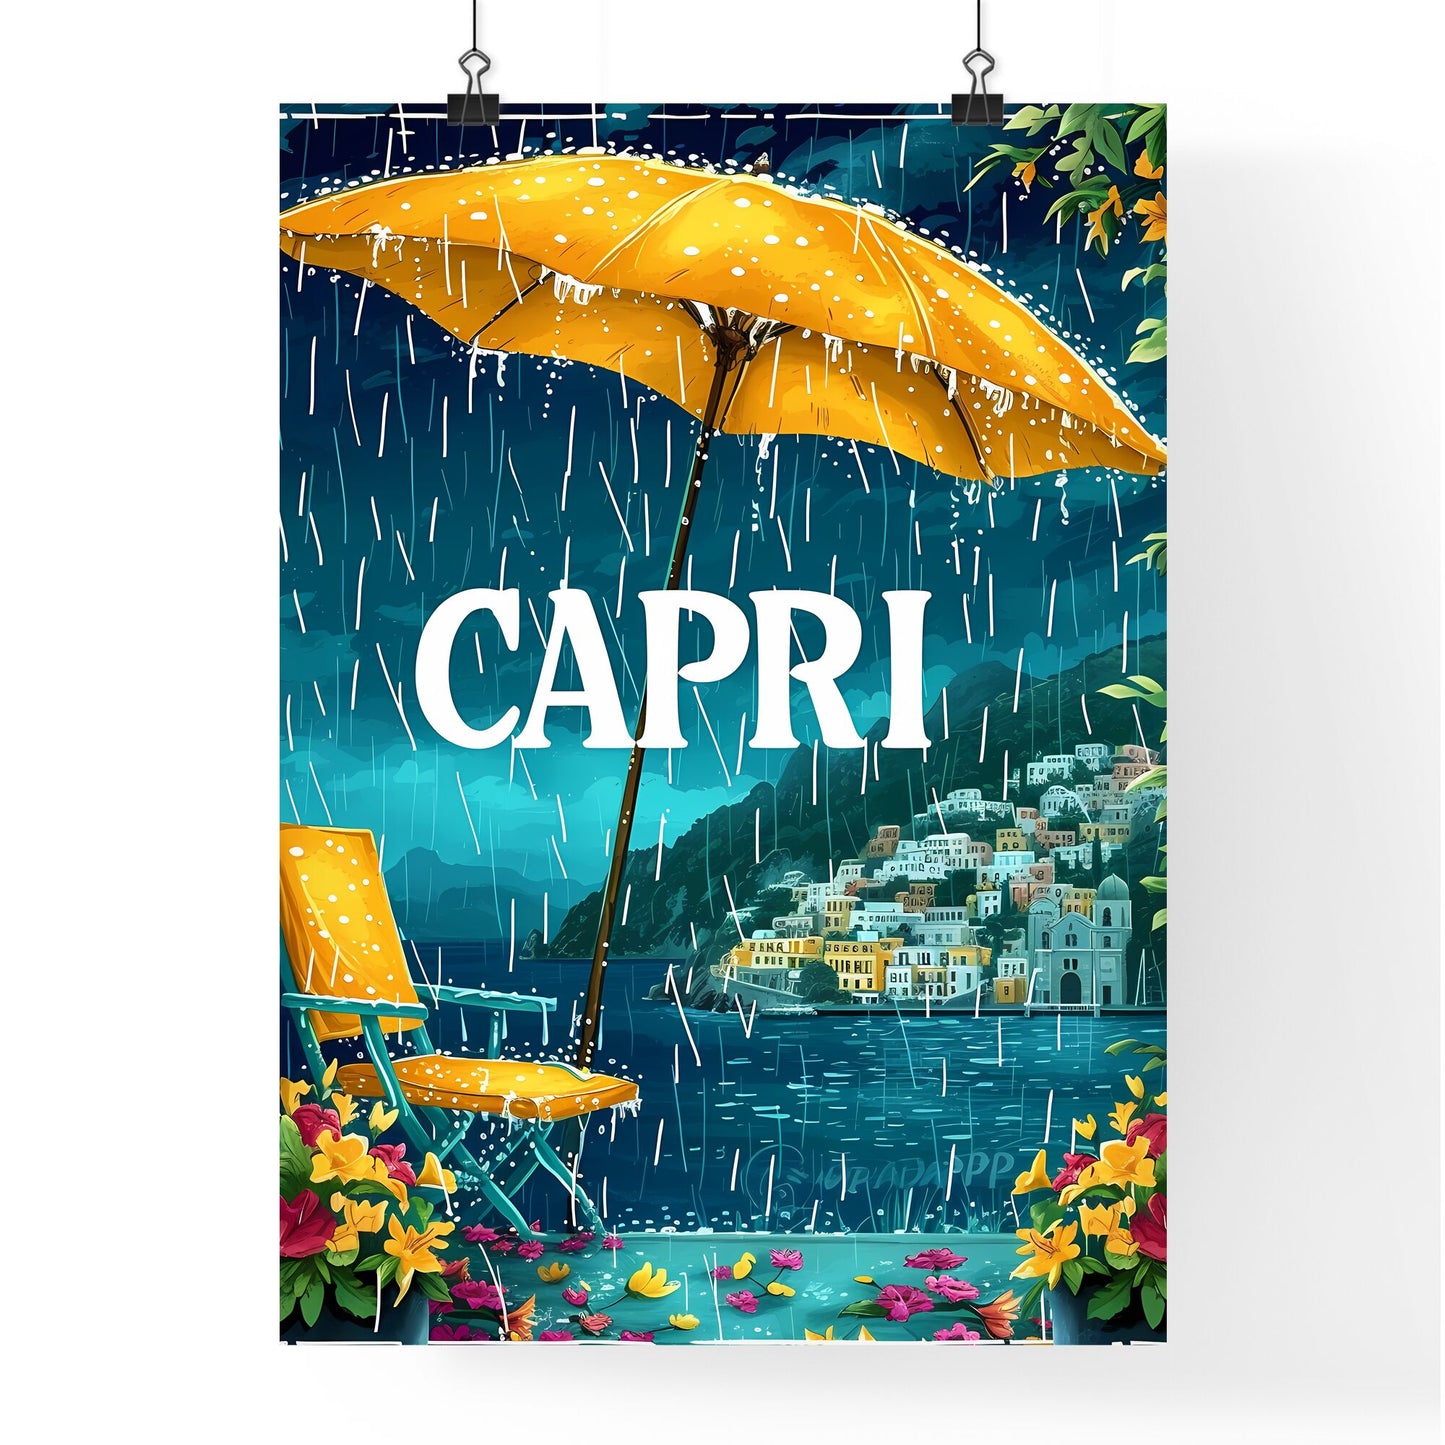 Capri Italy with text CAPRI in bodony font - Art print of a yellow umbrella and chair in the rain Default Title